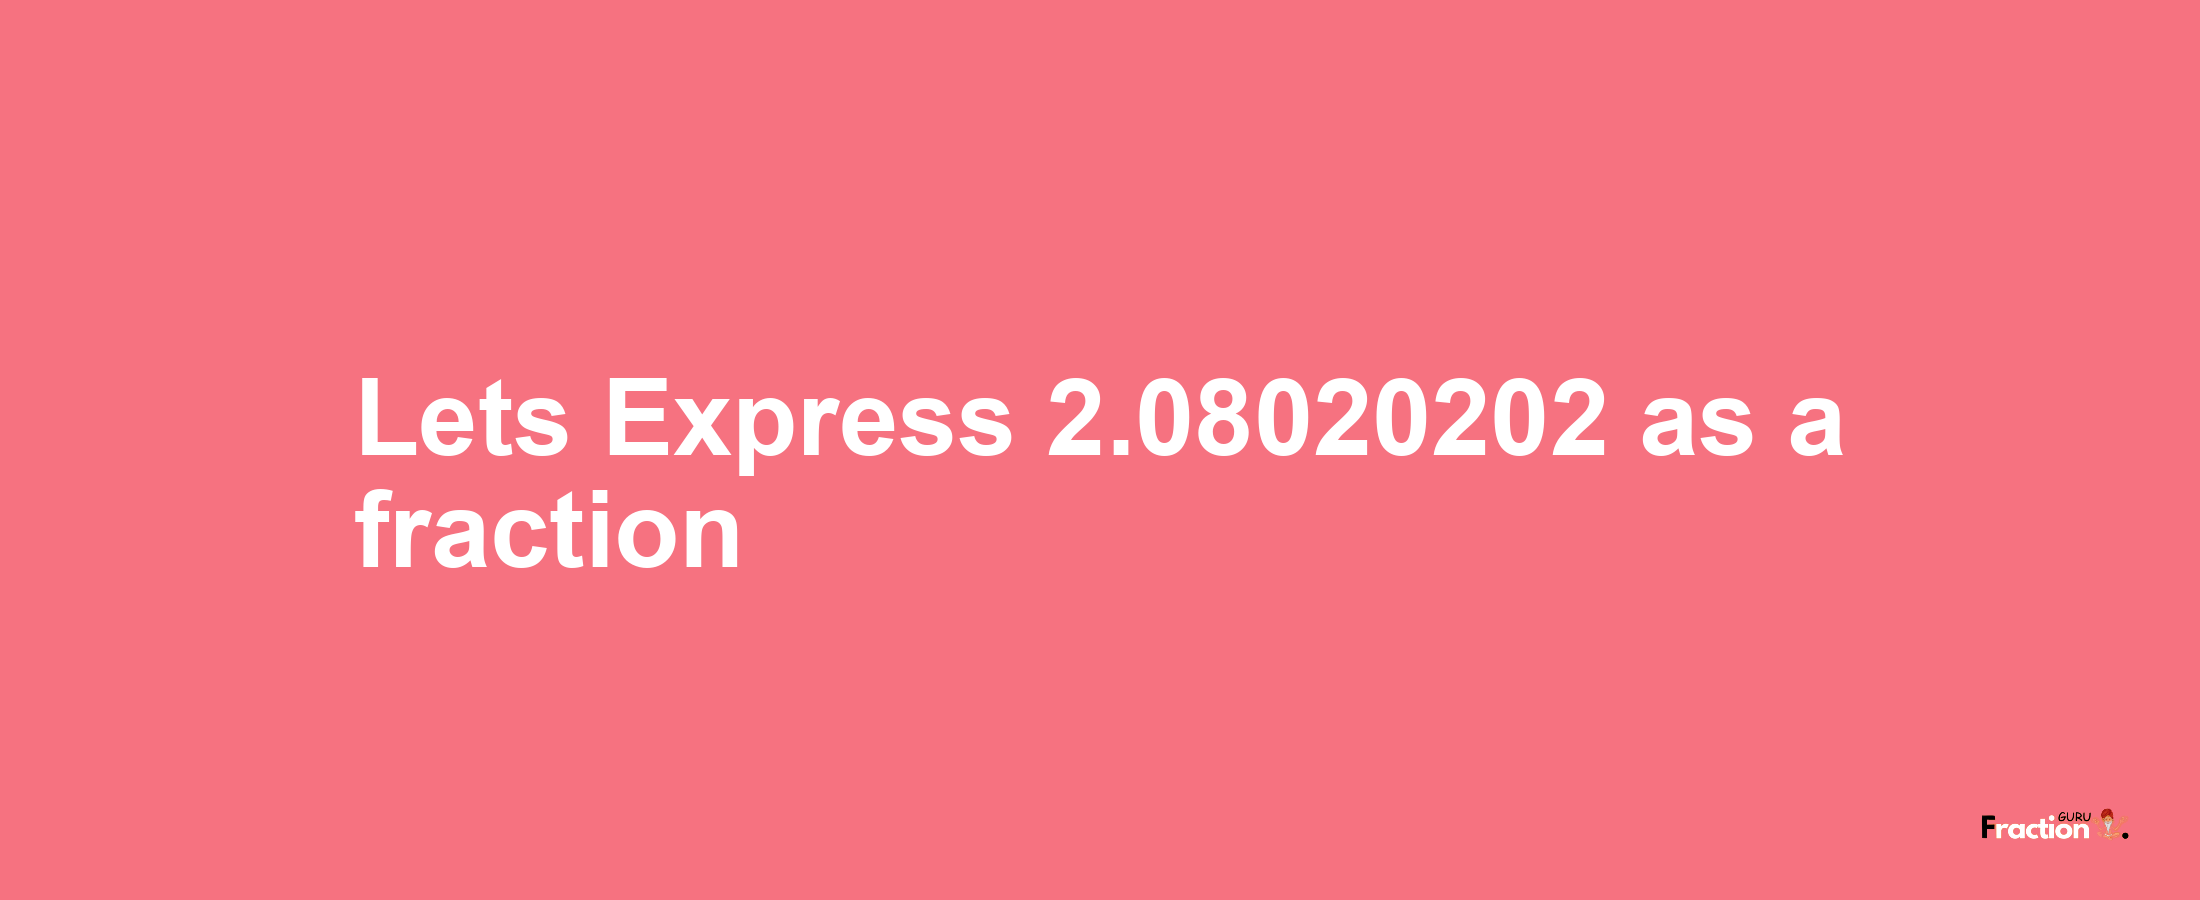 Lets Express 2.08020202 as afraction